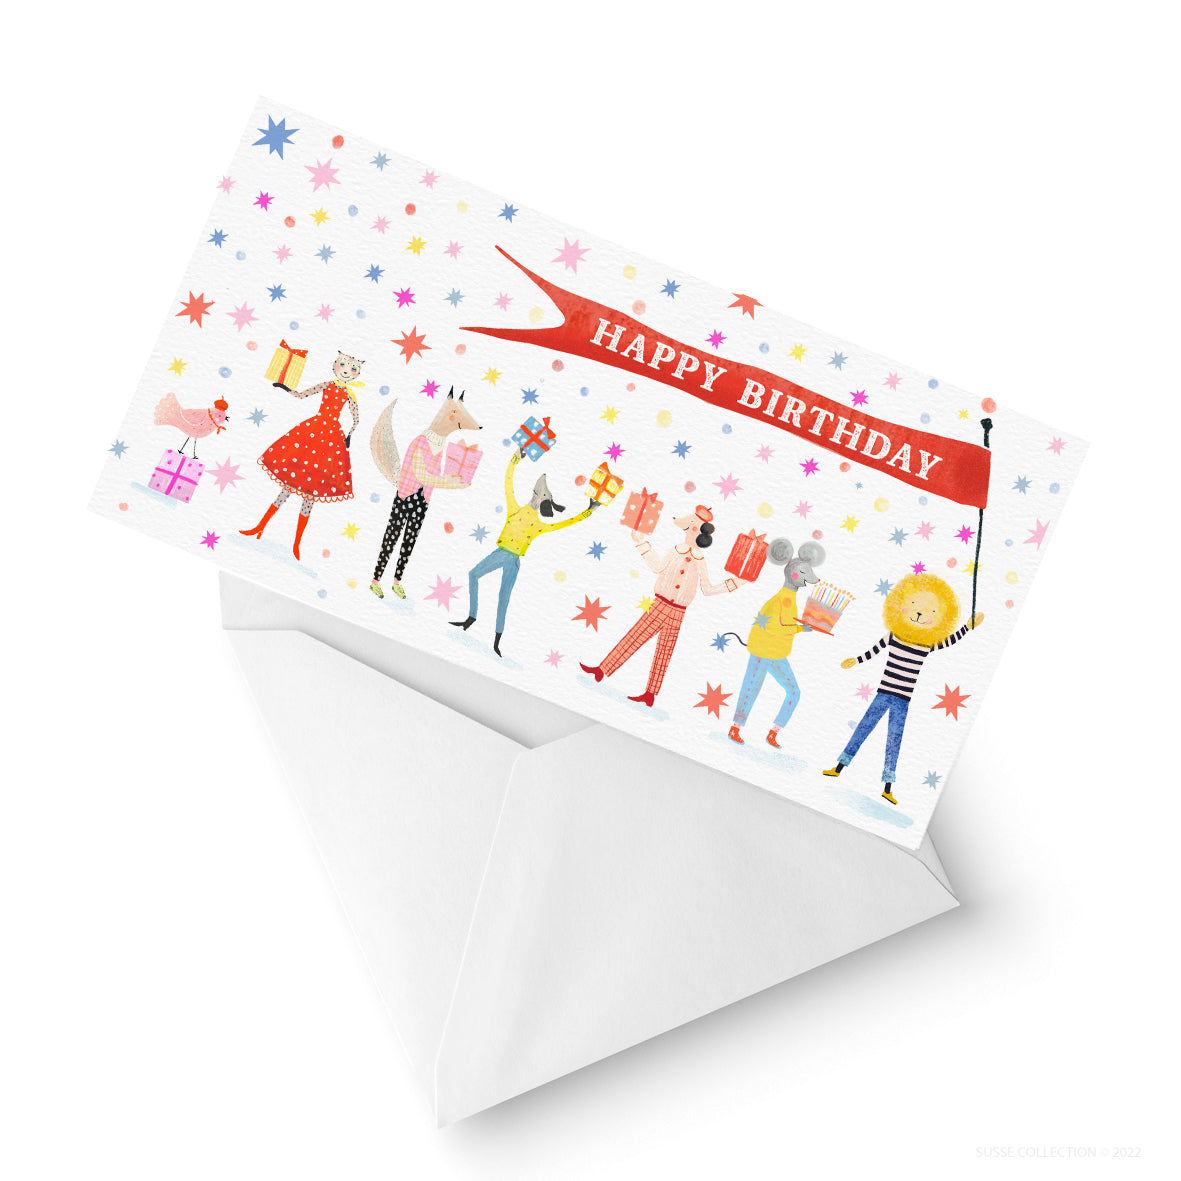 Happy Birthday English Pack of 10 Square Folded Cards illustrated by Susse Linton -inside